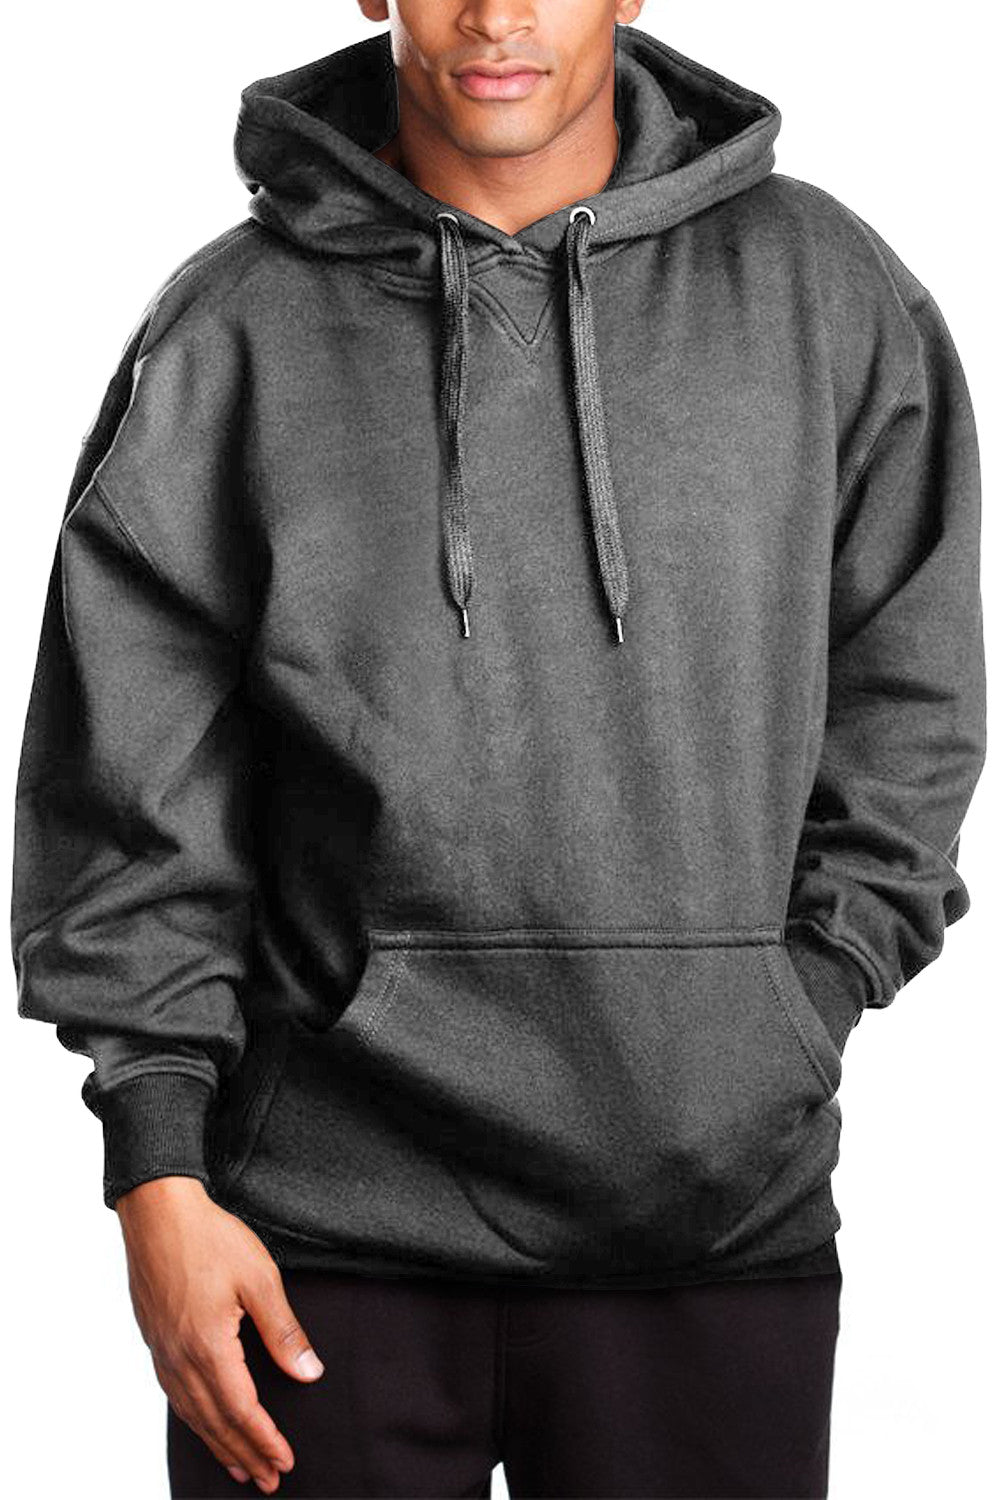 Fleece Dark Grey Pullover hoodie: Versatile & cozy. Double-lined hood. Loose fit tip: Opt one size down for snugness. Sizes: S-XL. Colors: Black, Heather Grey, Dark Grey, Navy